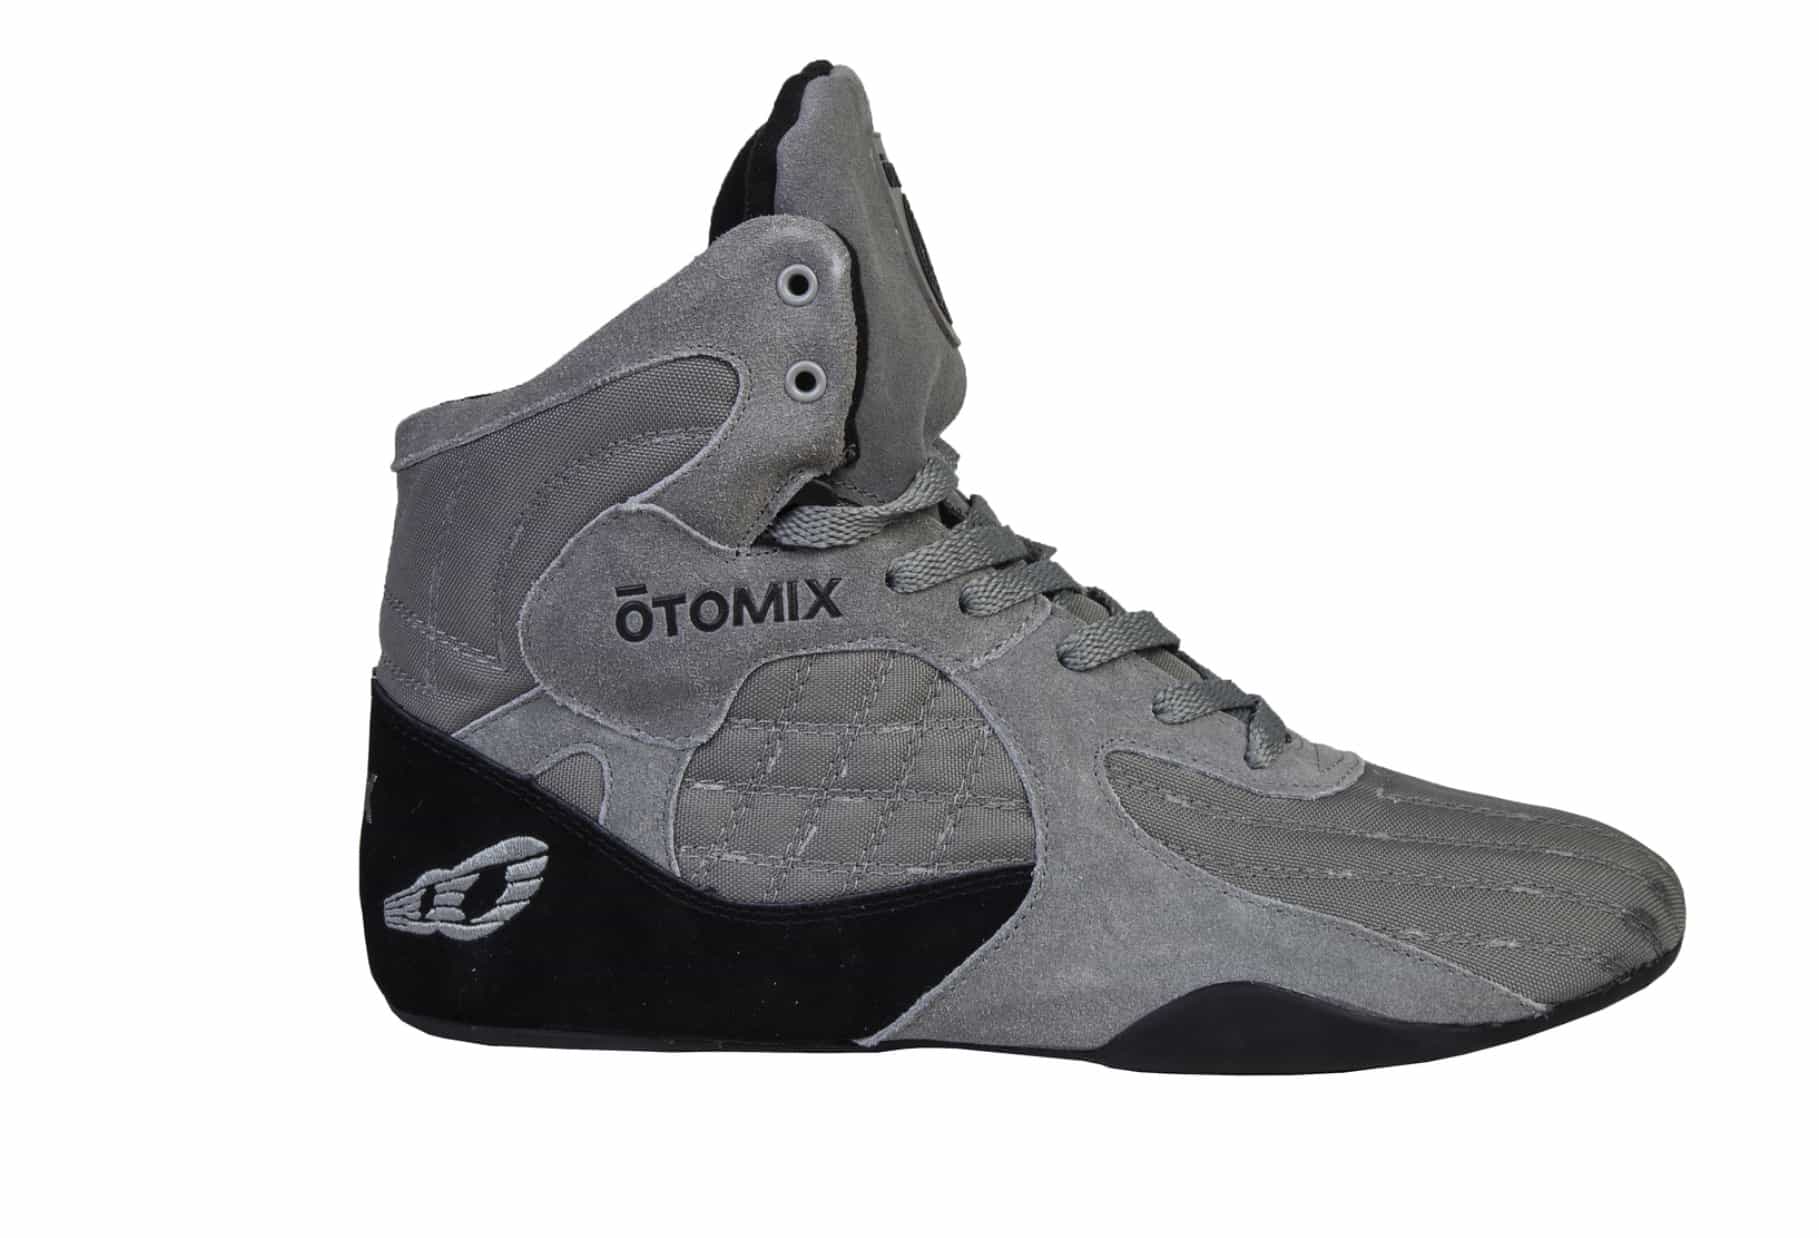 otomix shoes